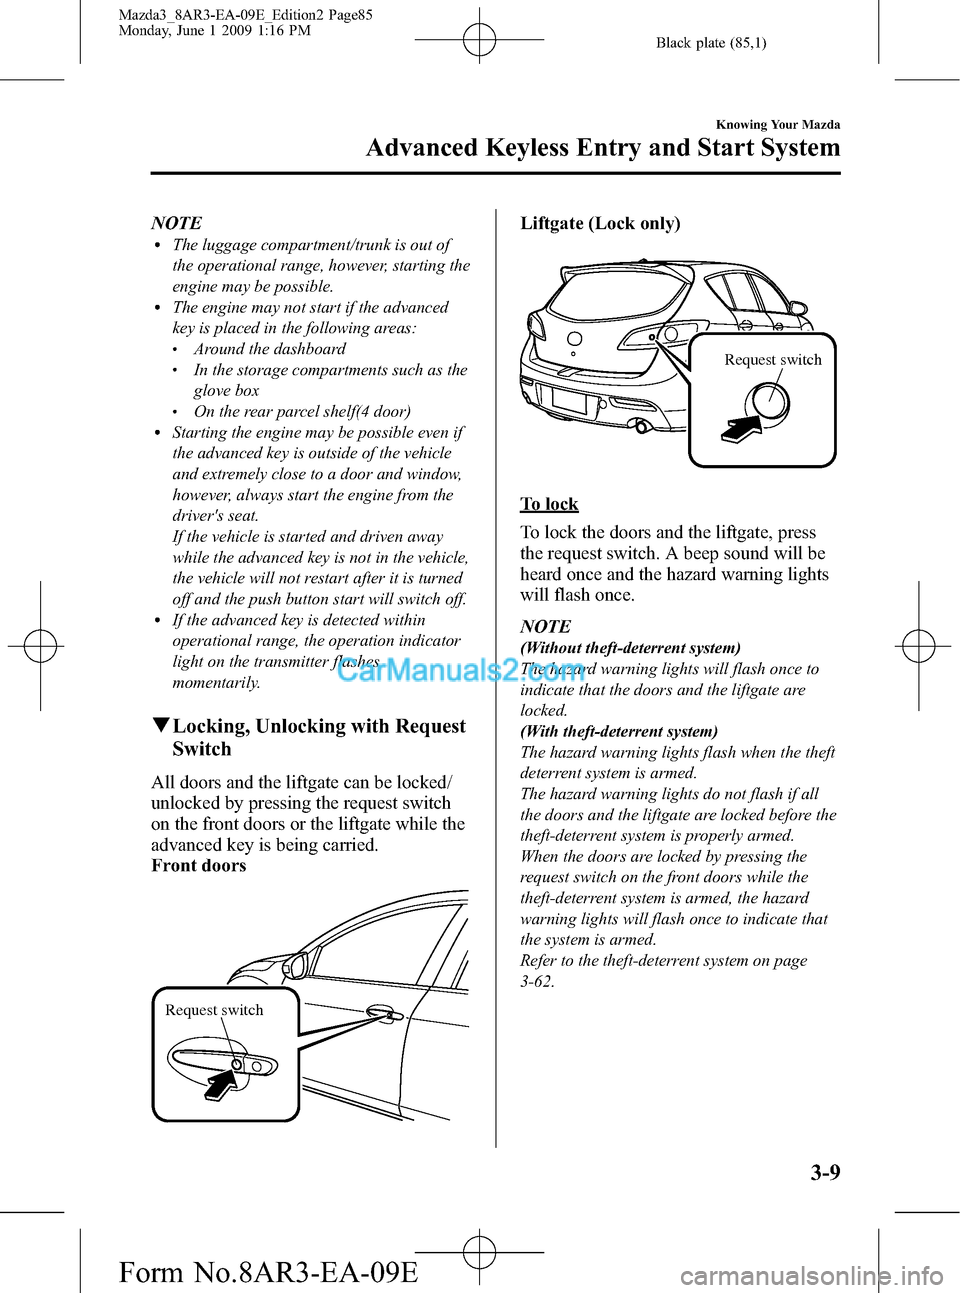 MAZDA MODEL MAZDASPEED 3 2010  Owners Manual (in English) Black plate (85,1)
NOTElThe luggage compartment/trunk is out of
the operational range, however, starting the
engine may be possible.
lThe engine may not start if the advanced
key is placed in the foll